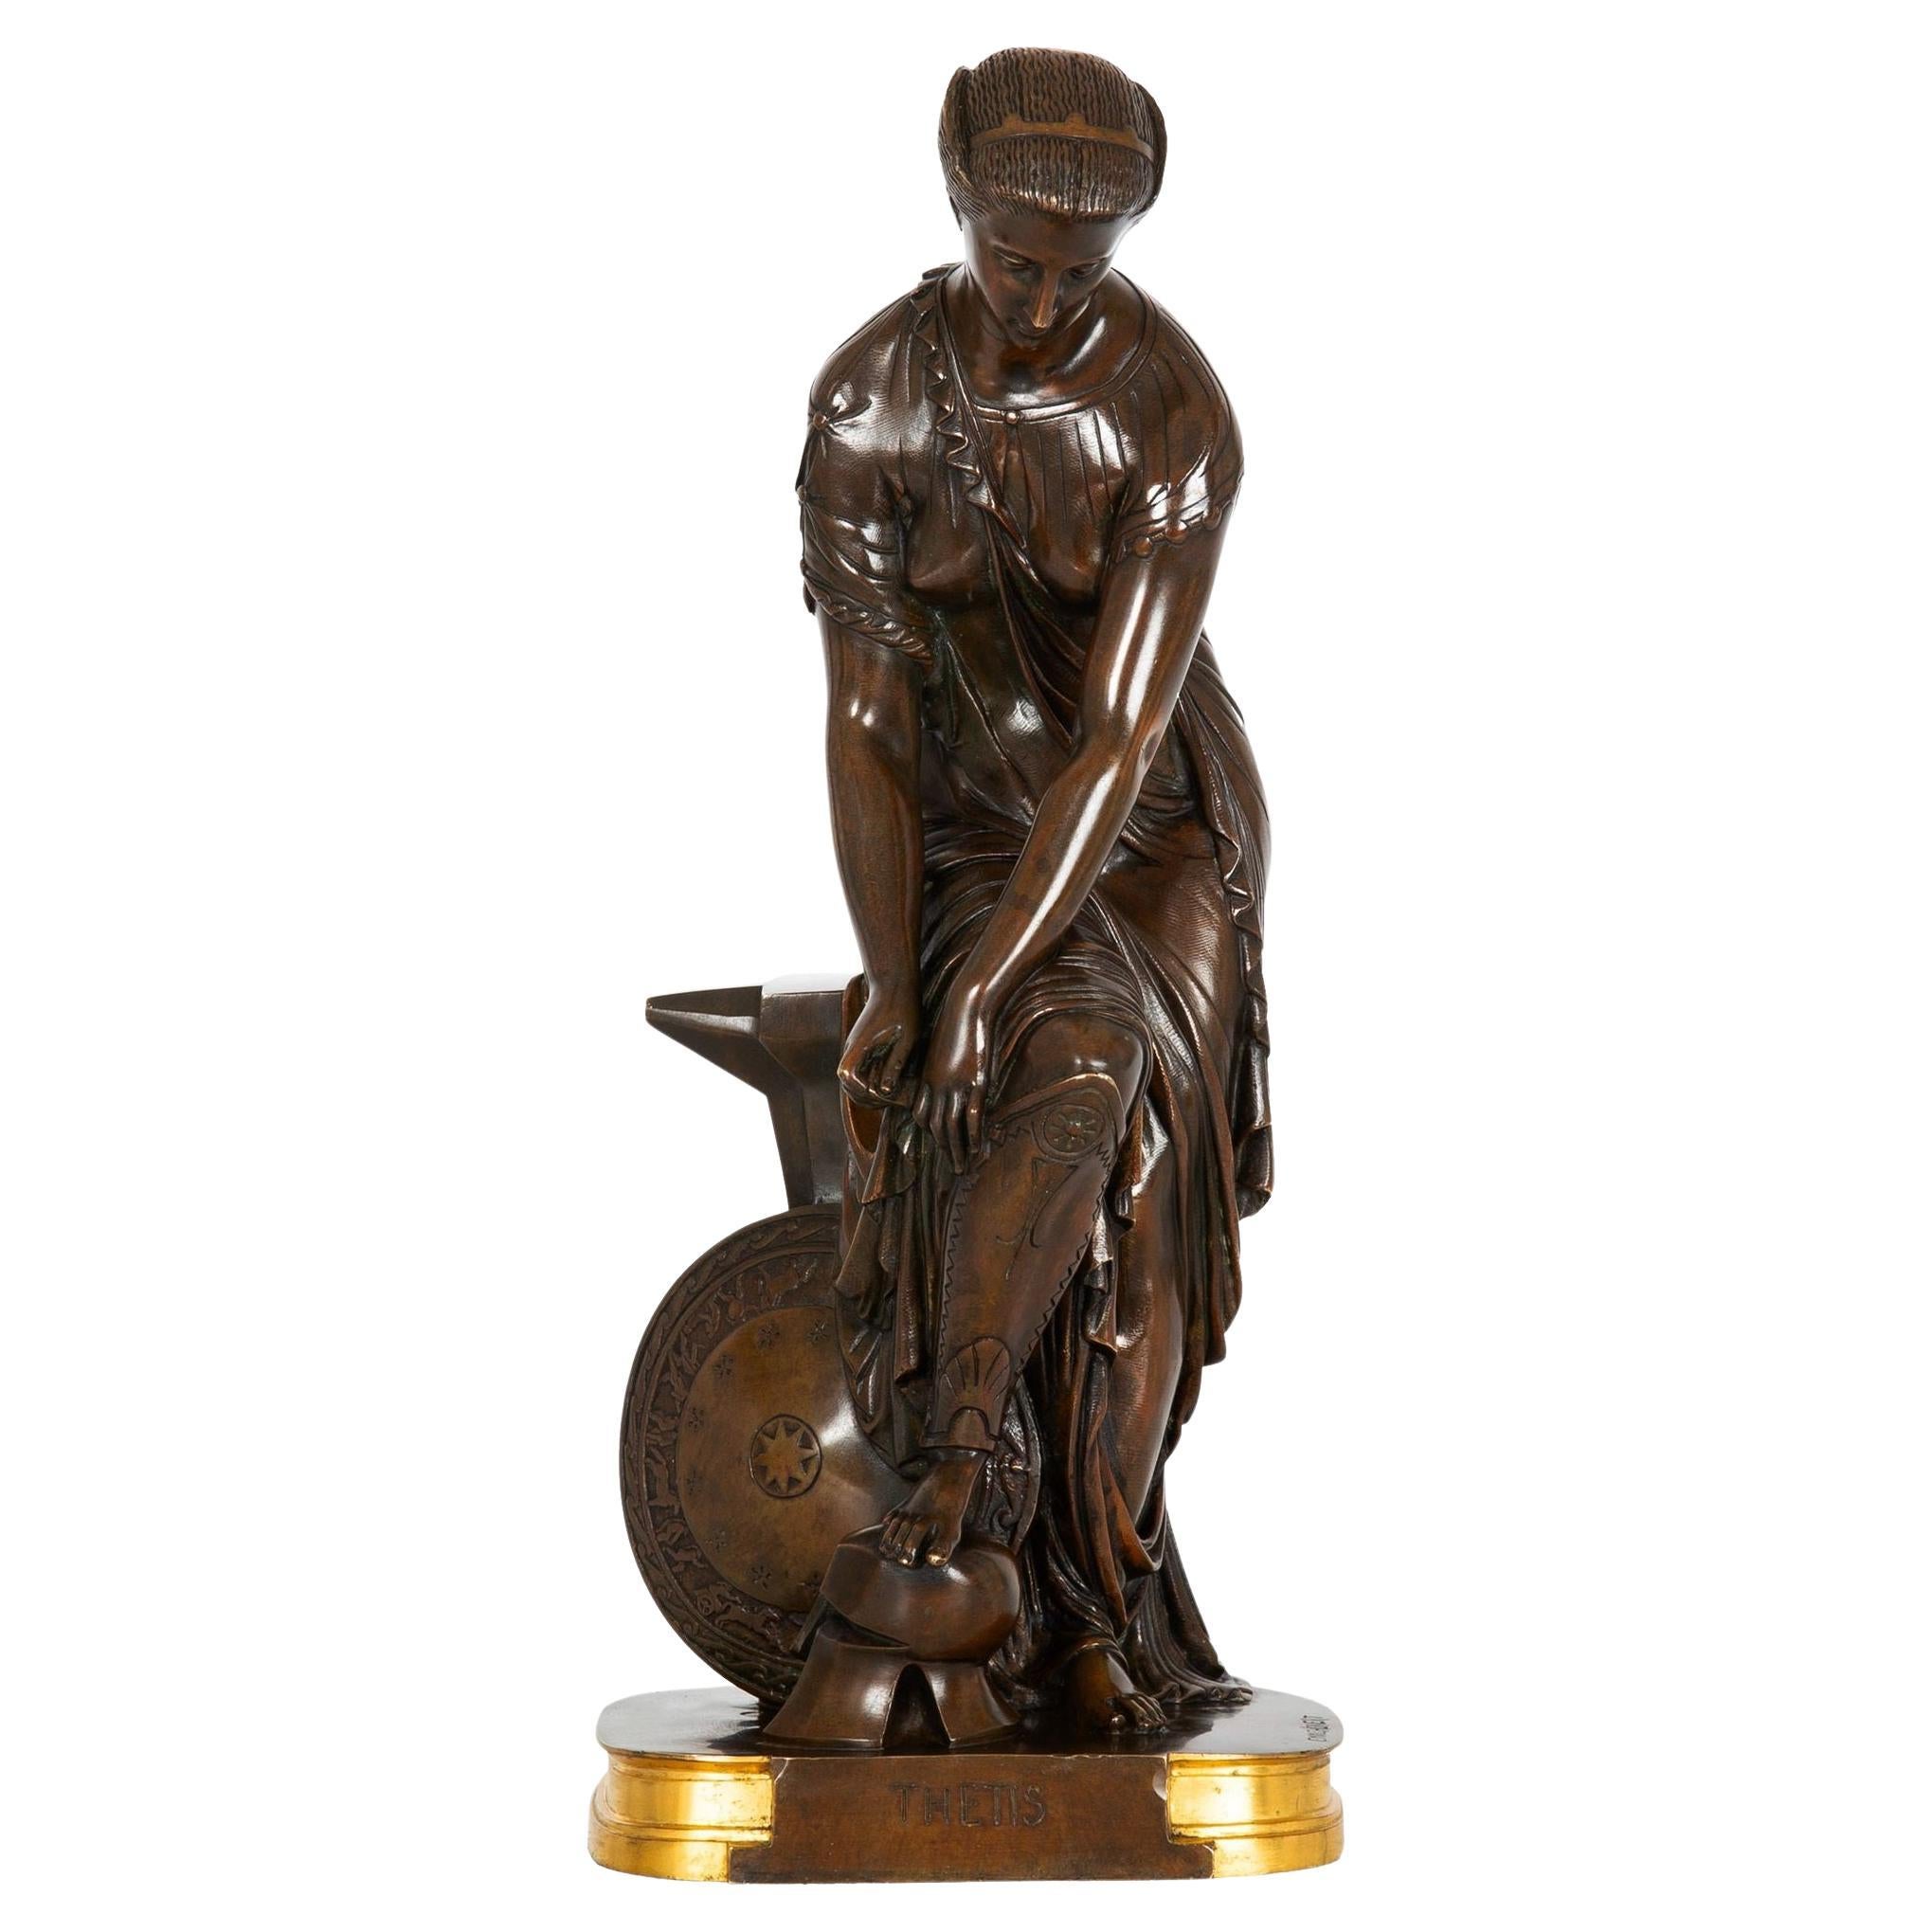 French Antique Bronze Sculpture “Thetis, Olympian” After Pierre Emile Hebert For Sale